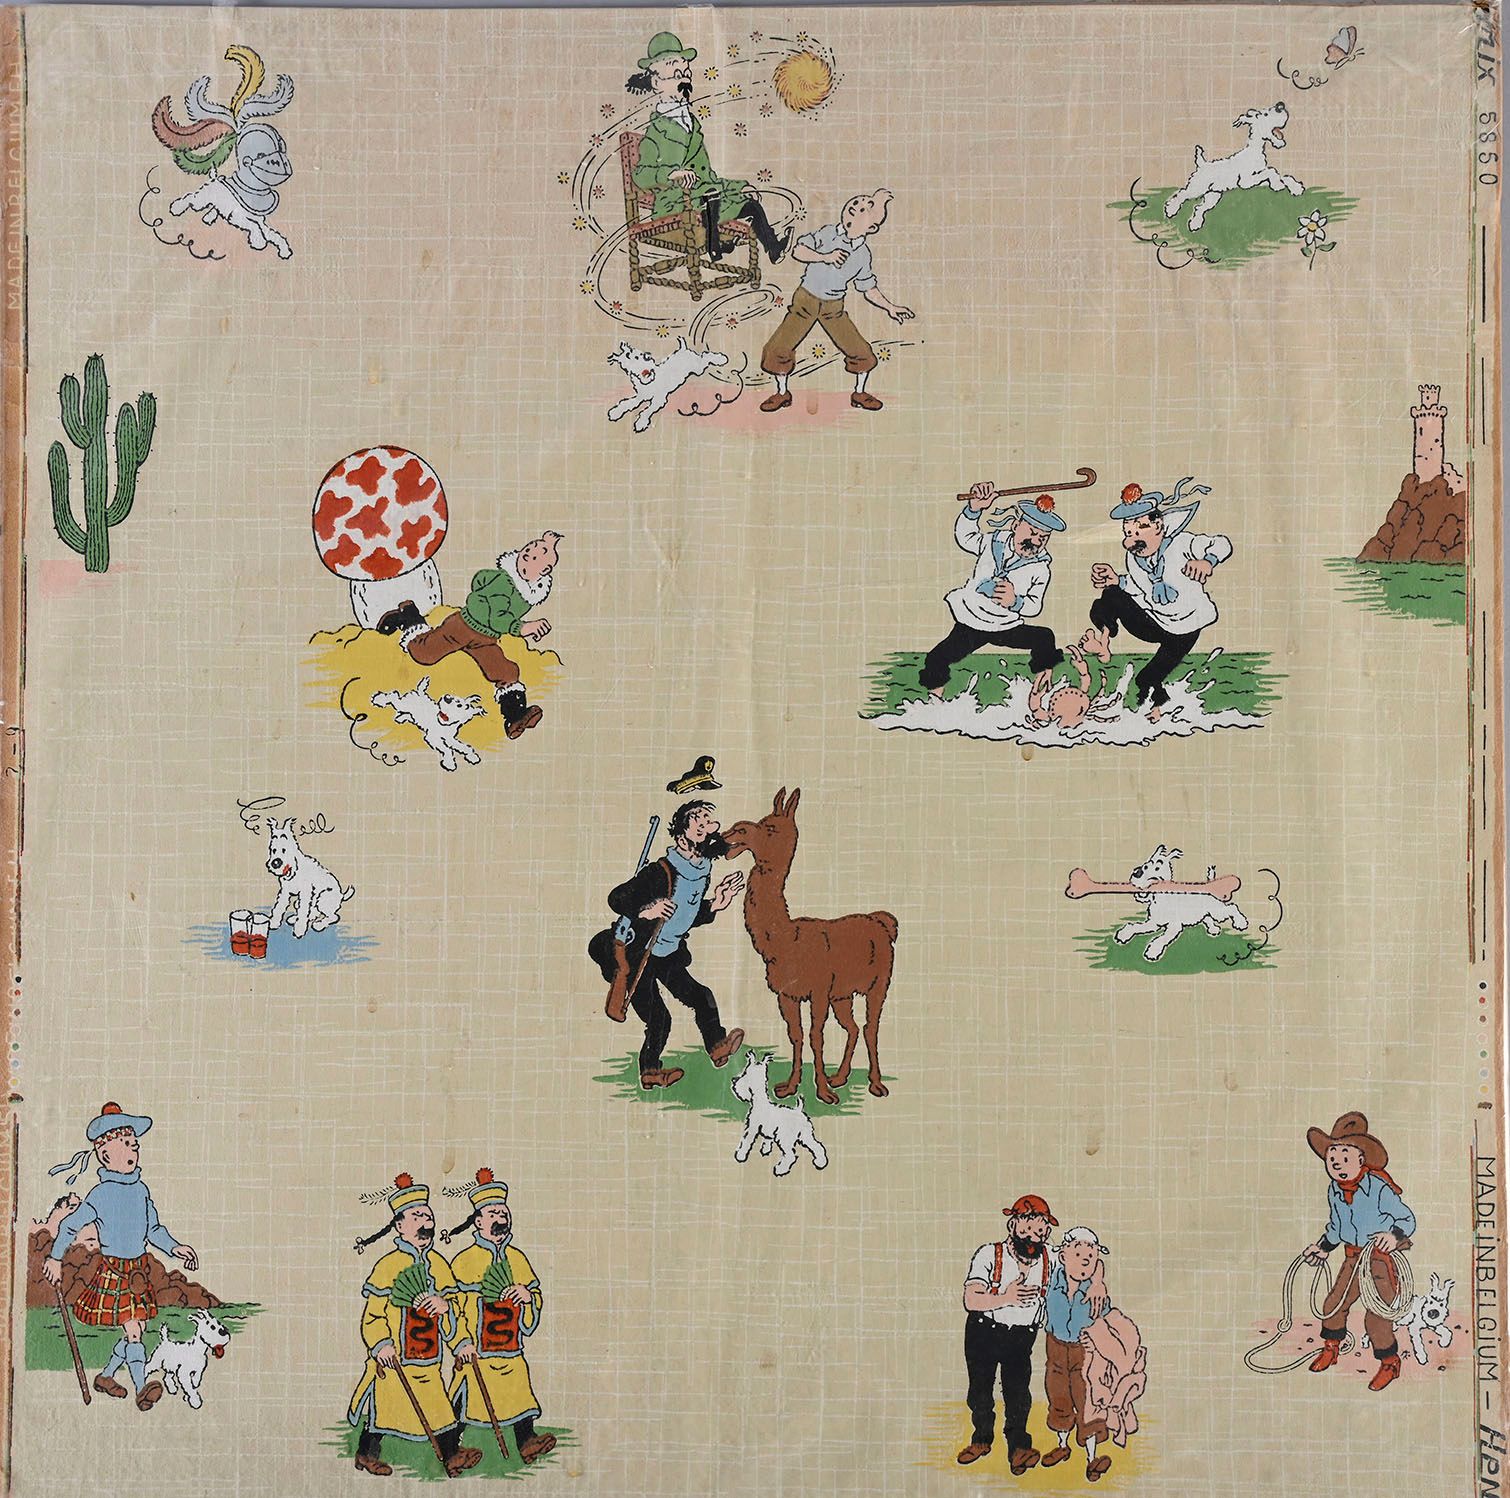 HERGE TAPESTRIES OF THE ADVENTURES OF TINTIN (About 1940).
Rare overprinted colo&hellip;